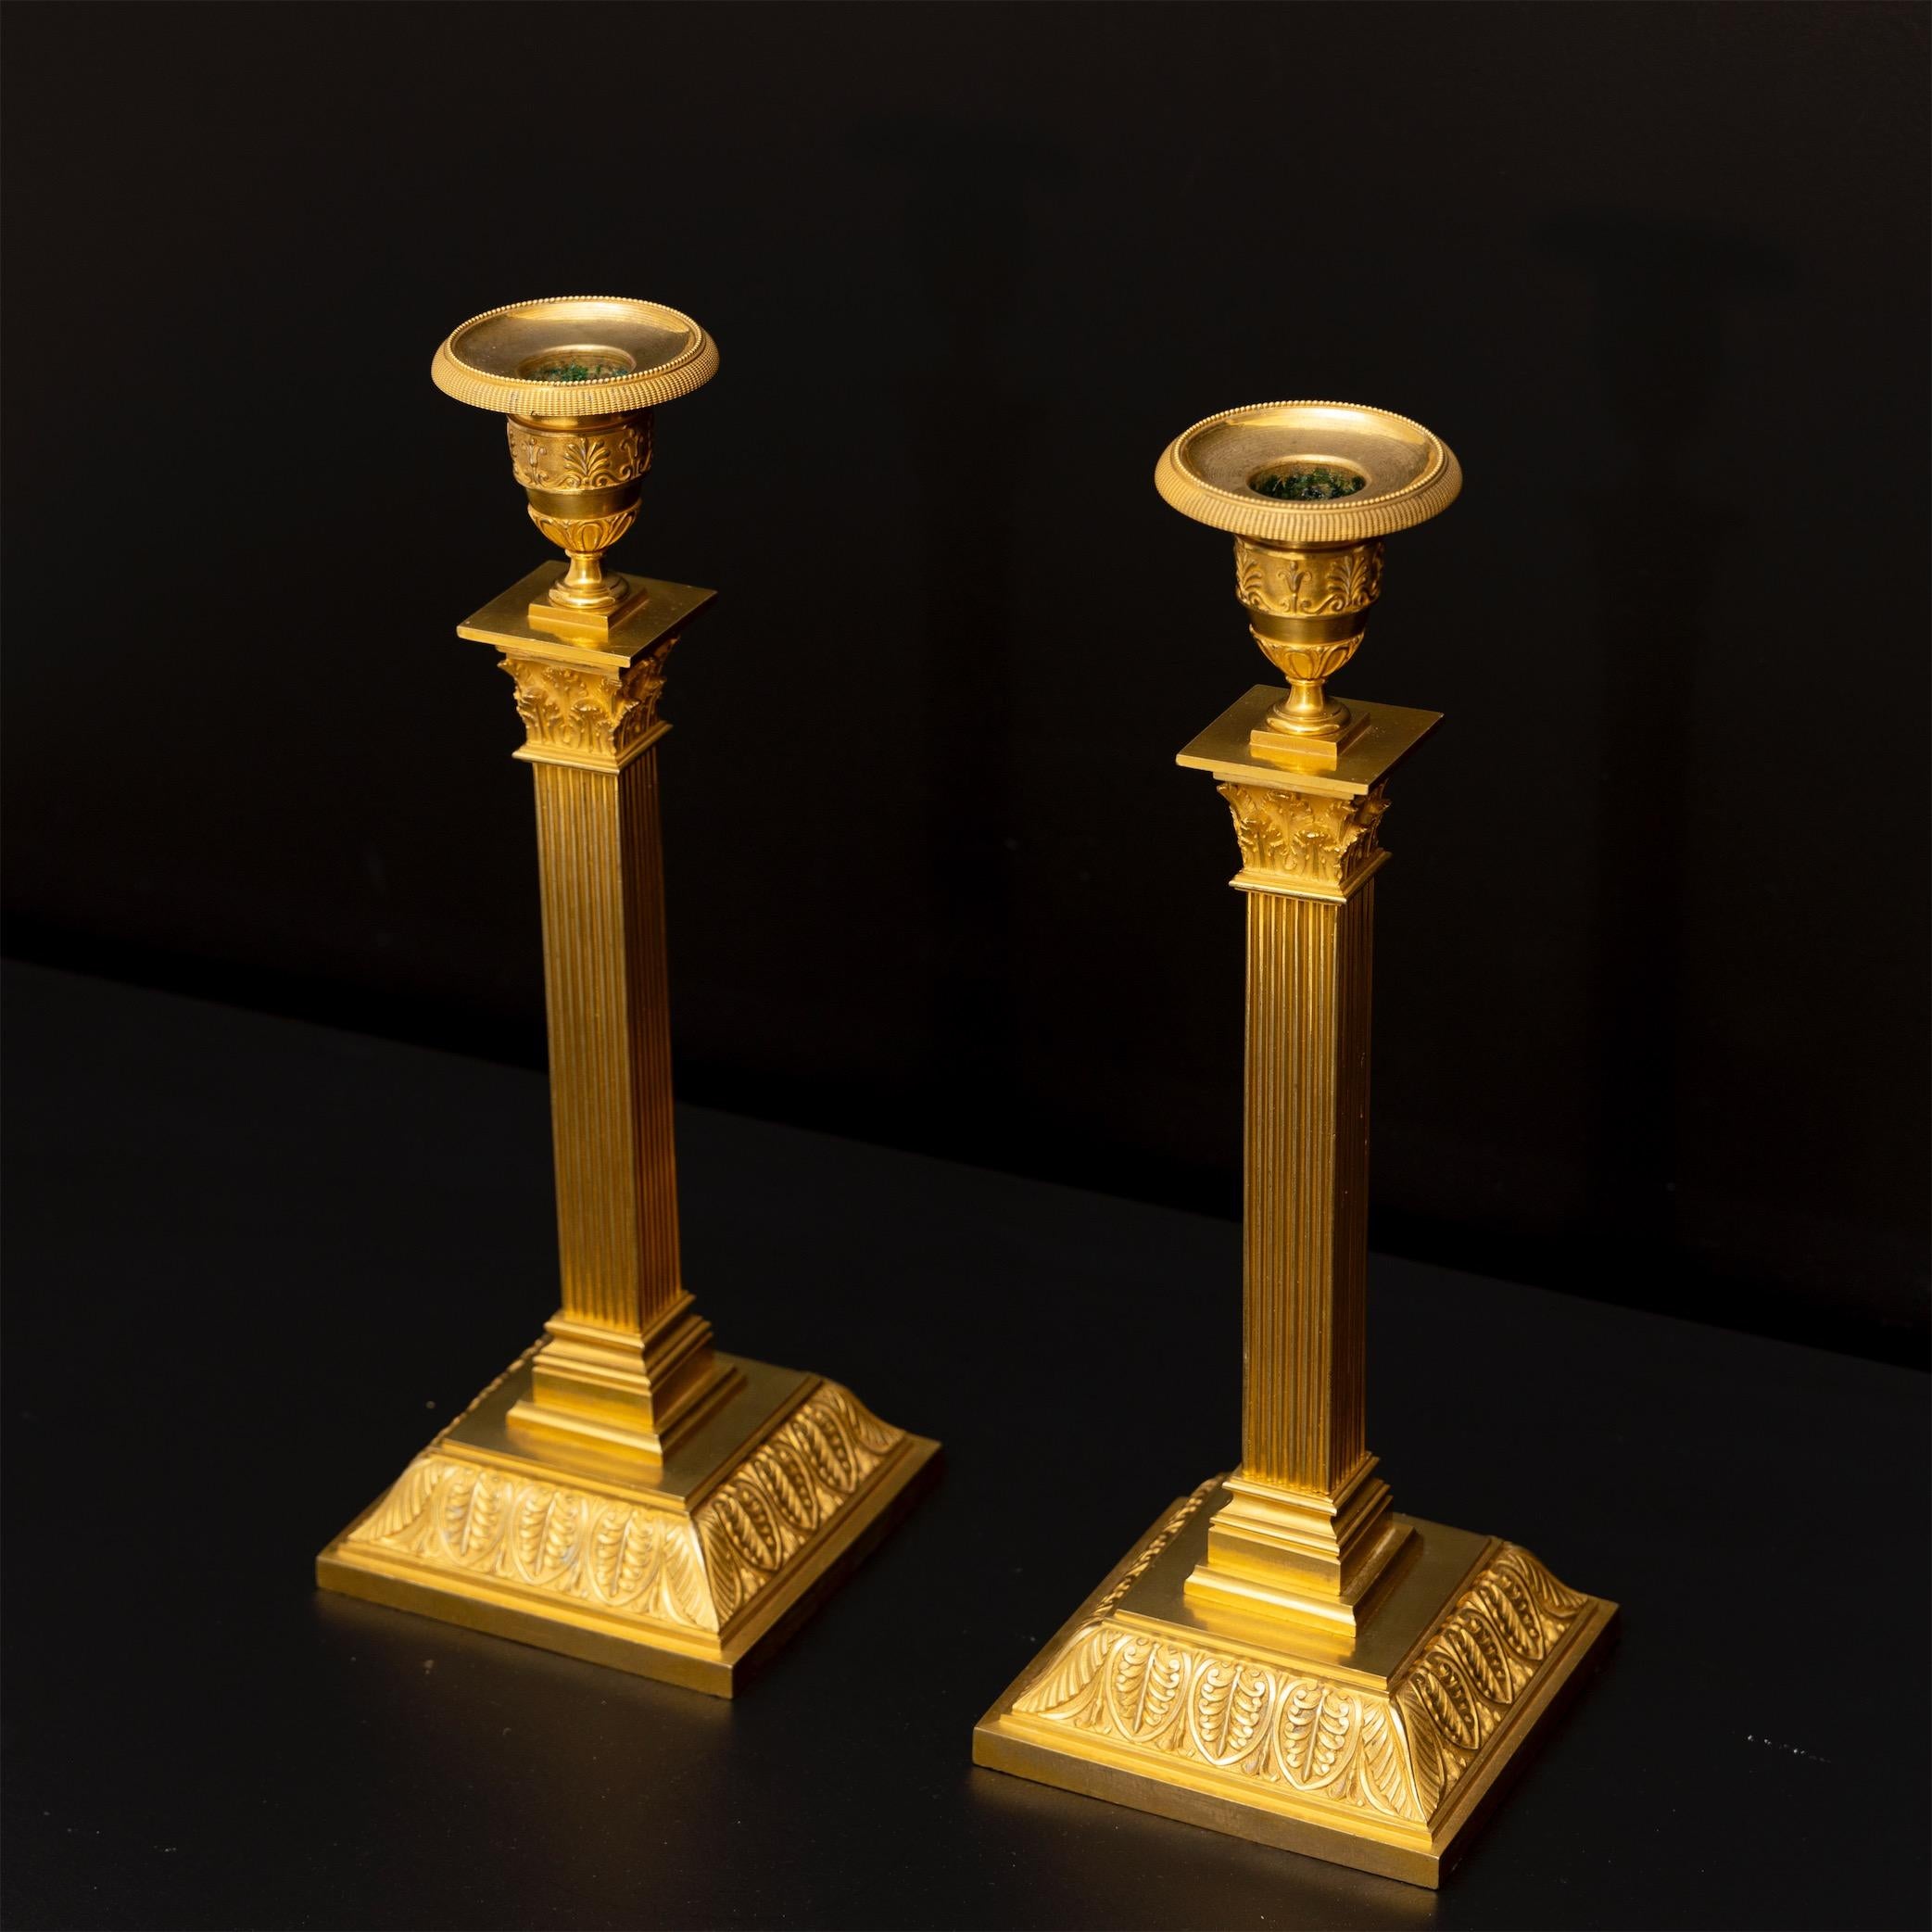 Swedish Pair of Candlesticks, Empire, Sweden, Early 19th Century